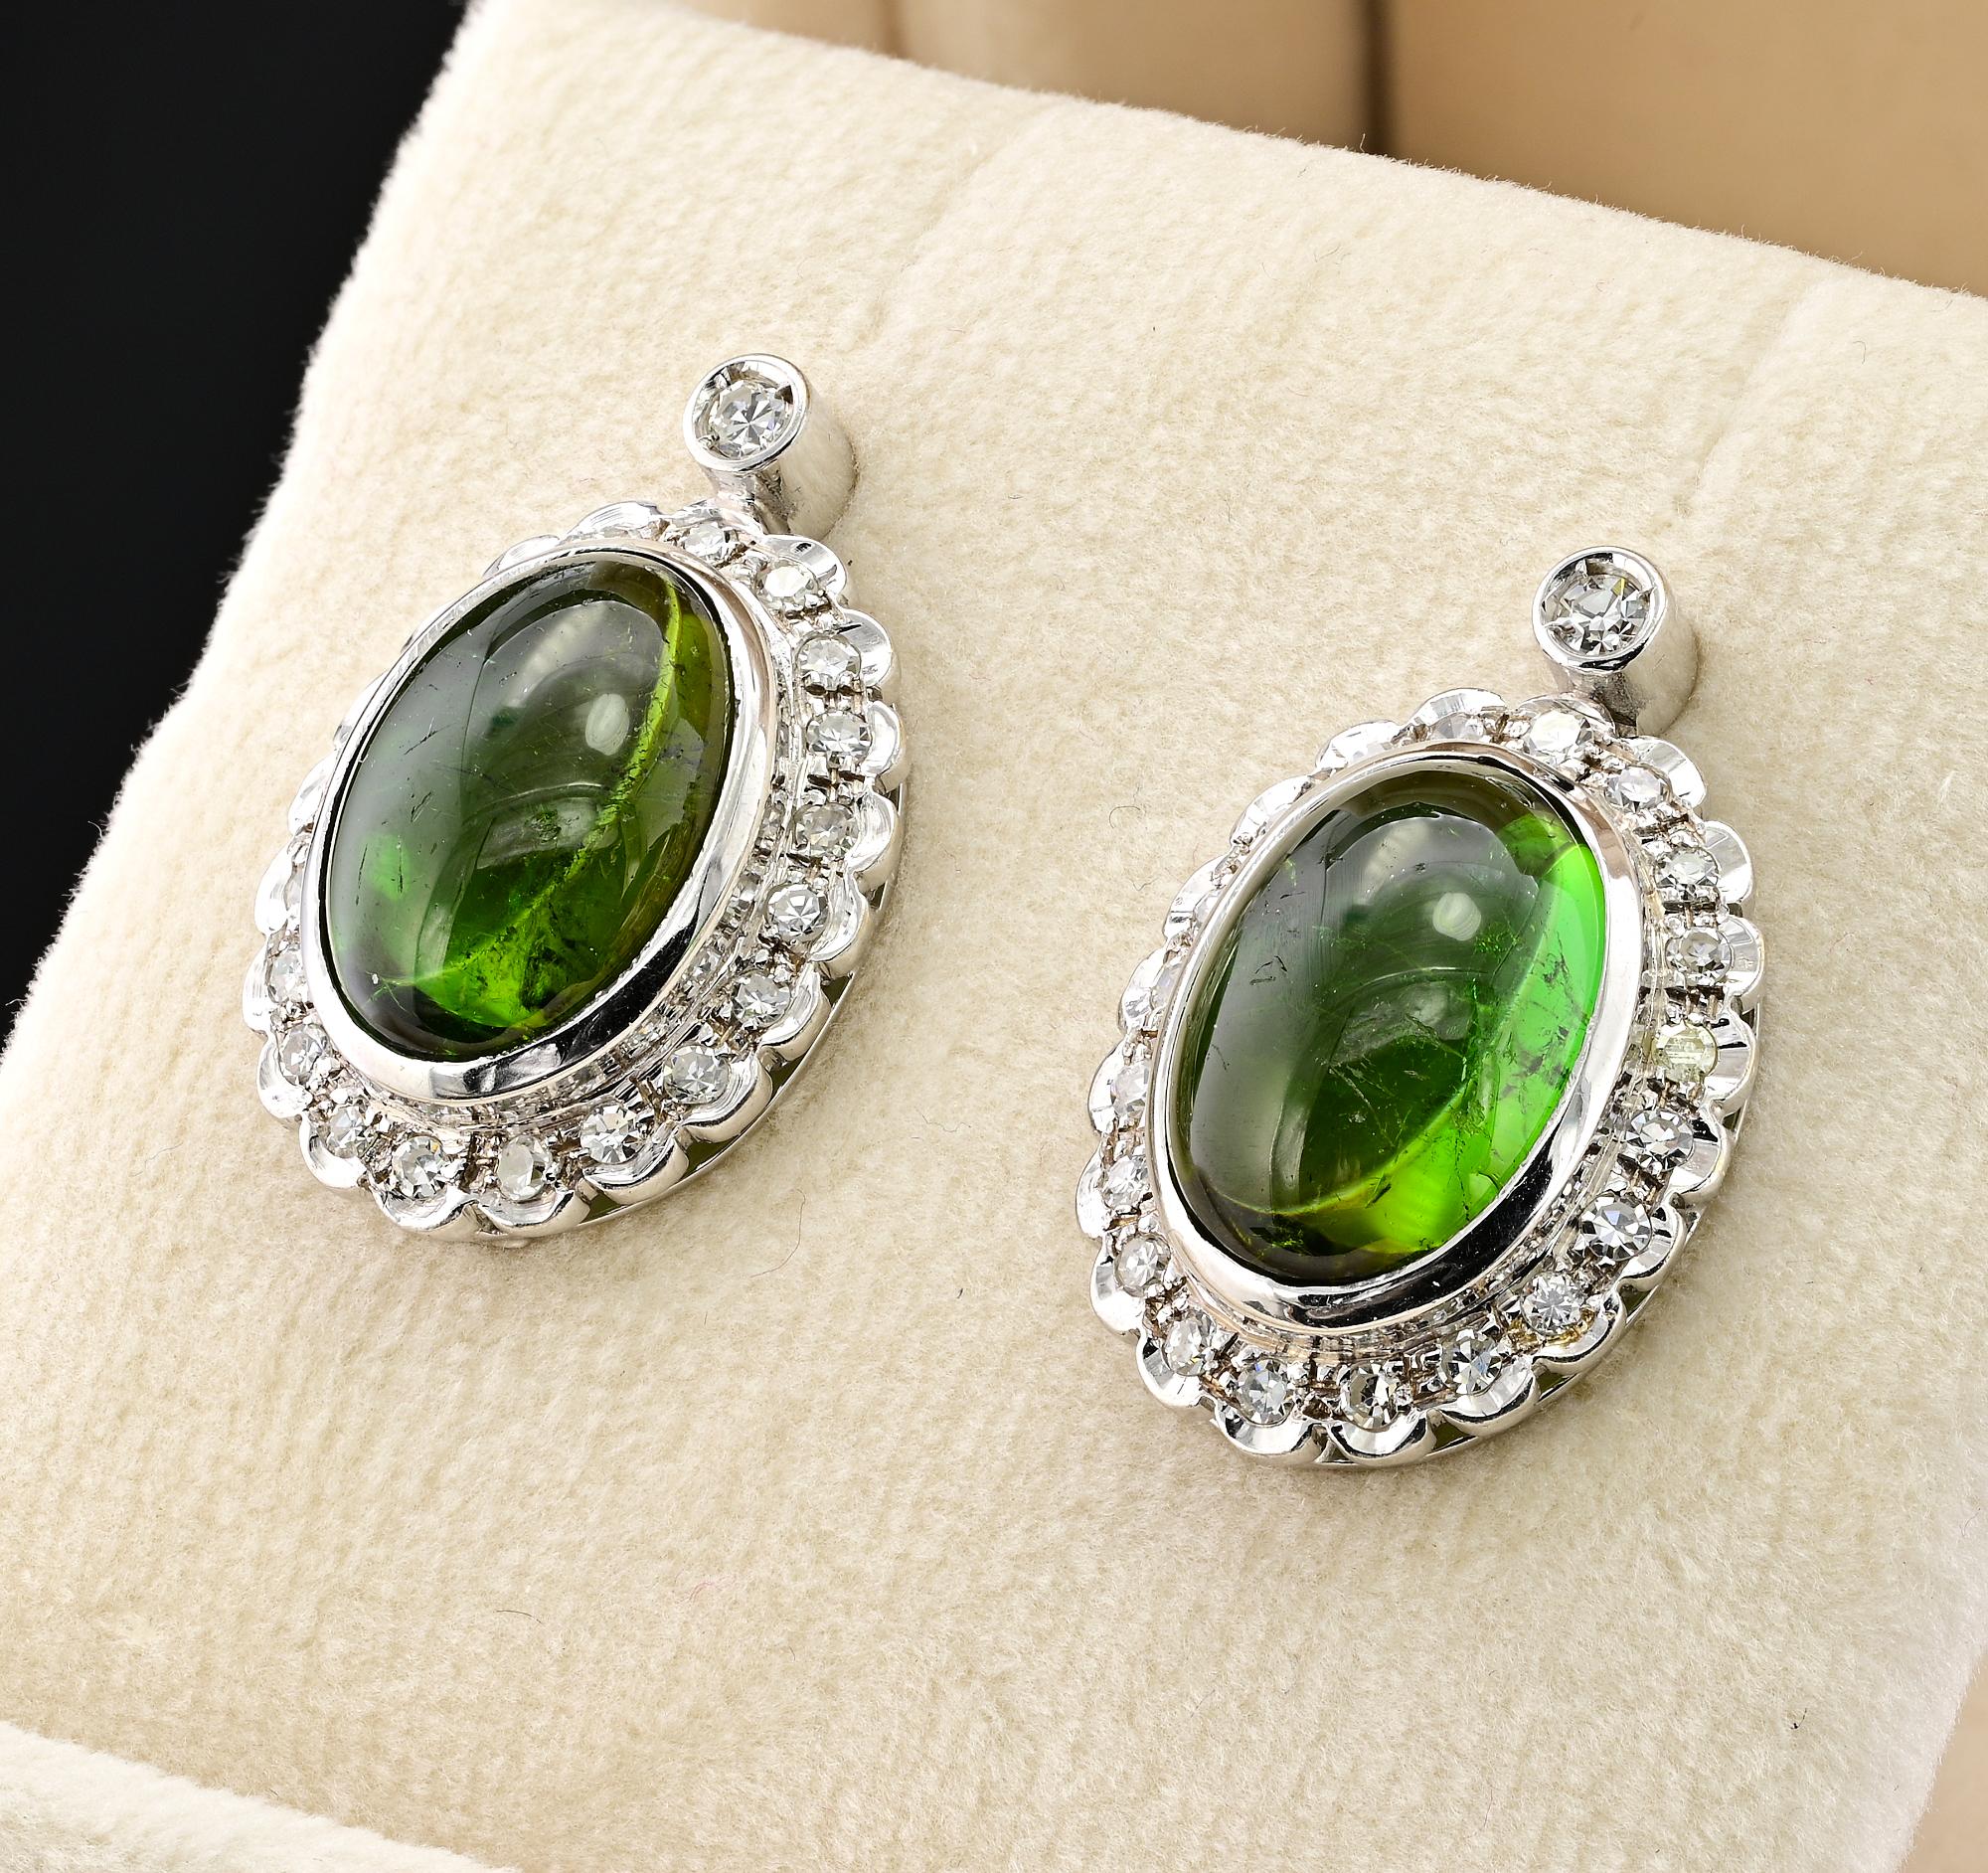 Contemporary Mid Century 13.0 Ct Green Tourmaline 1.0 Ct Diamond 18 KT Earrings For Sale